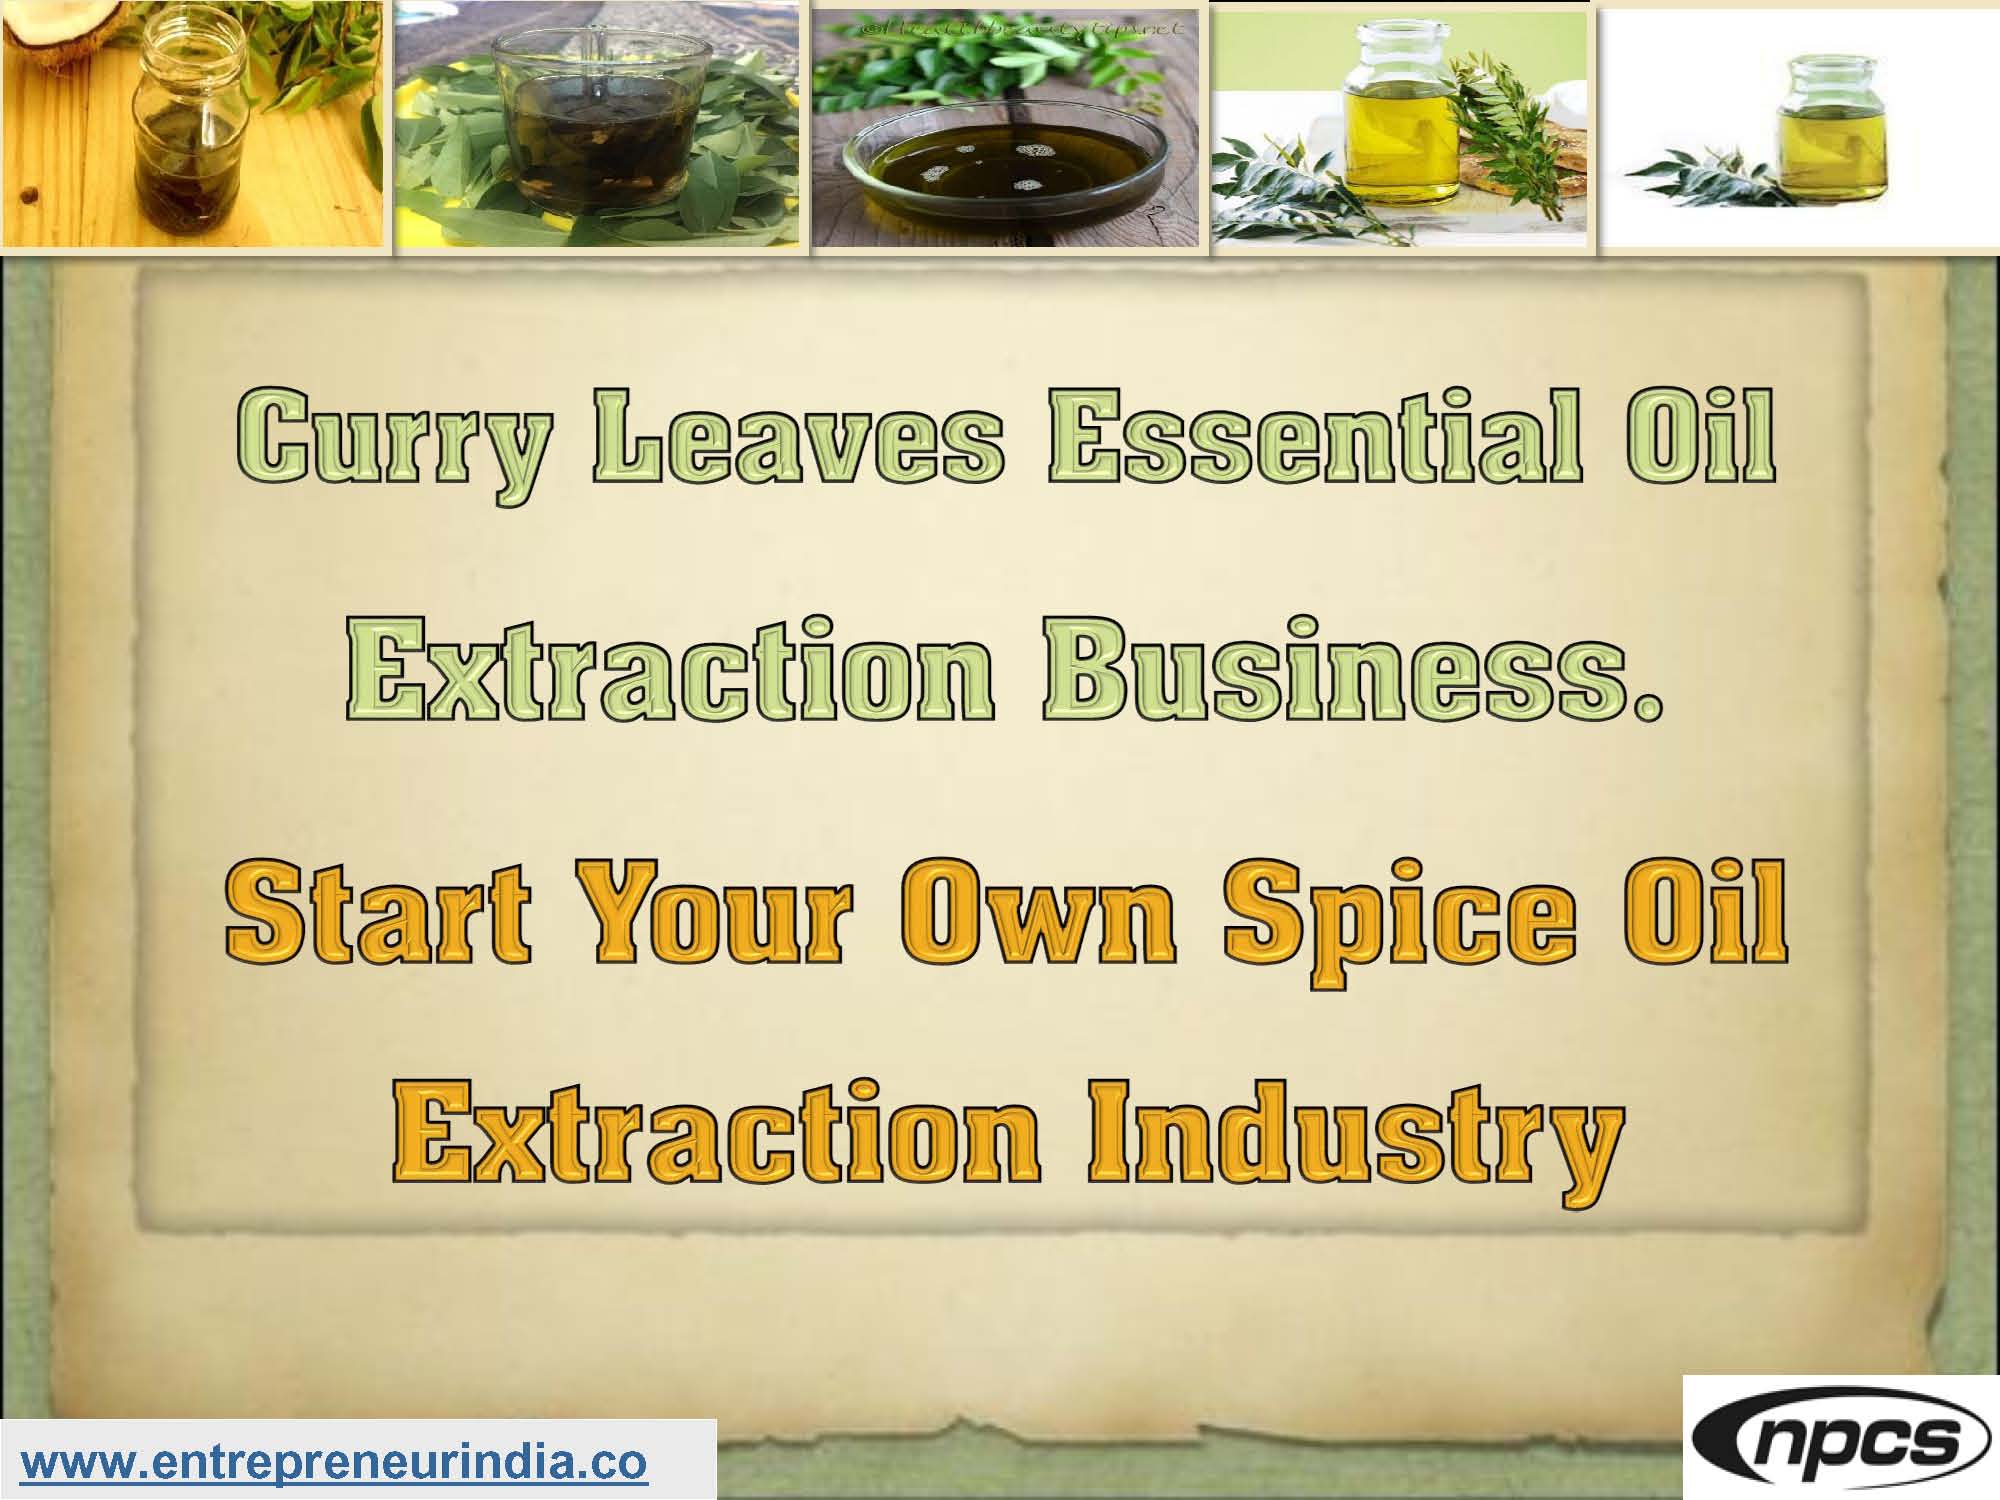 Curry Leaves Essential Oil Extraction Business